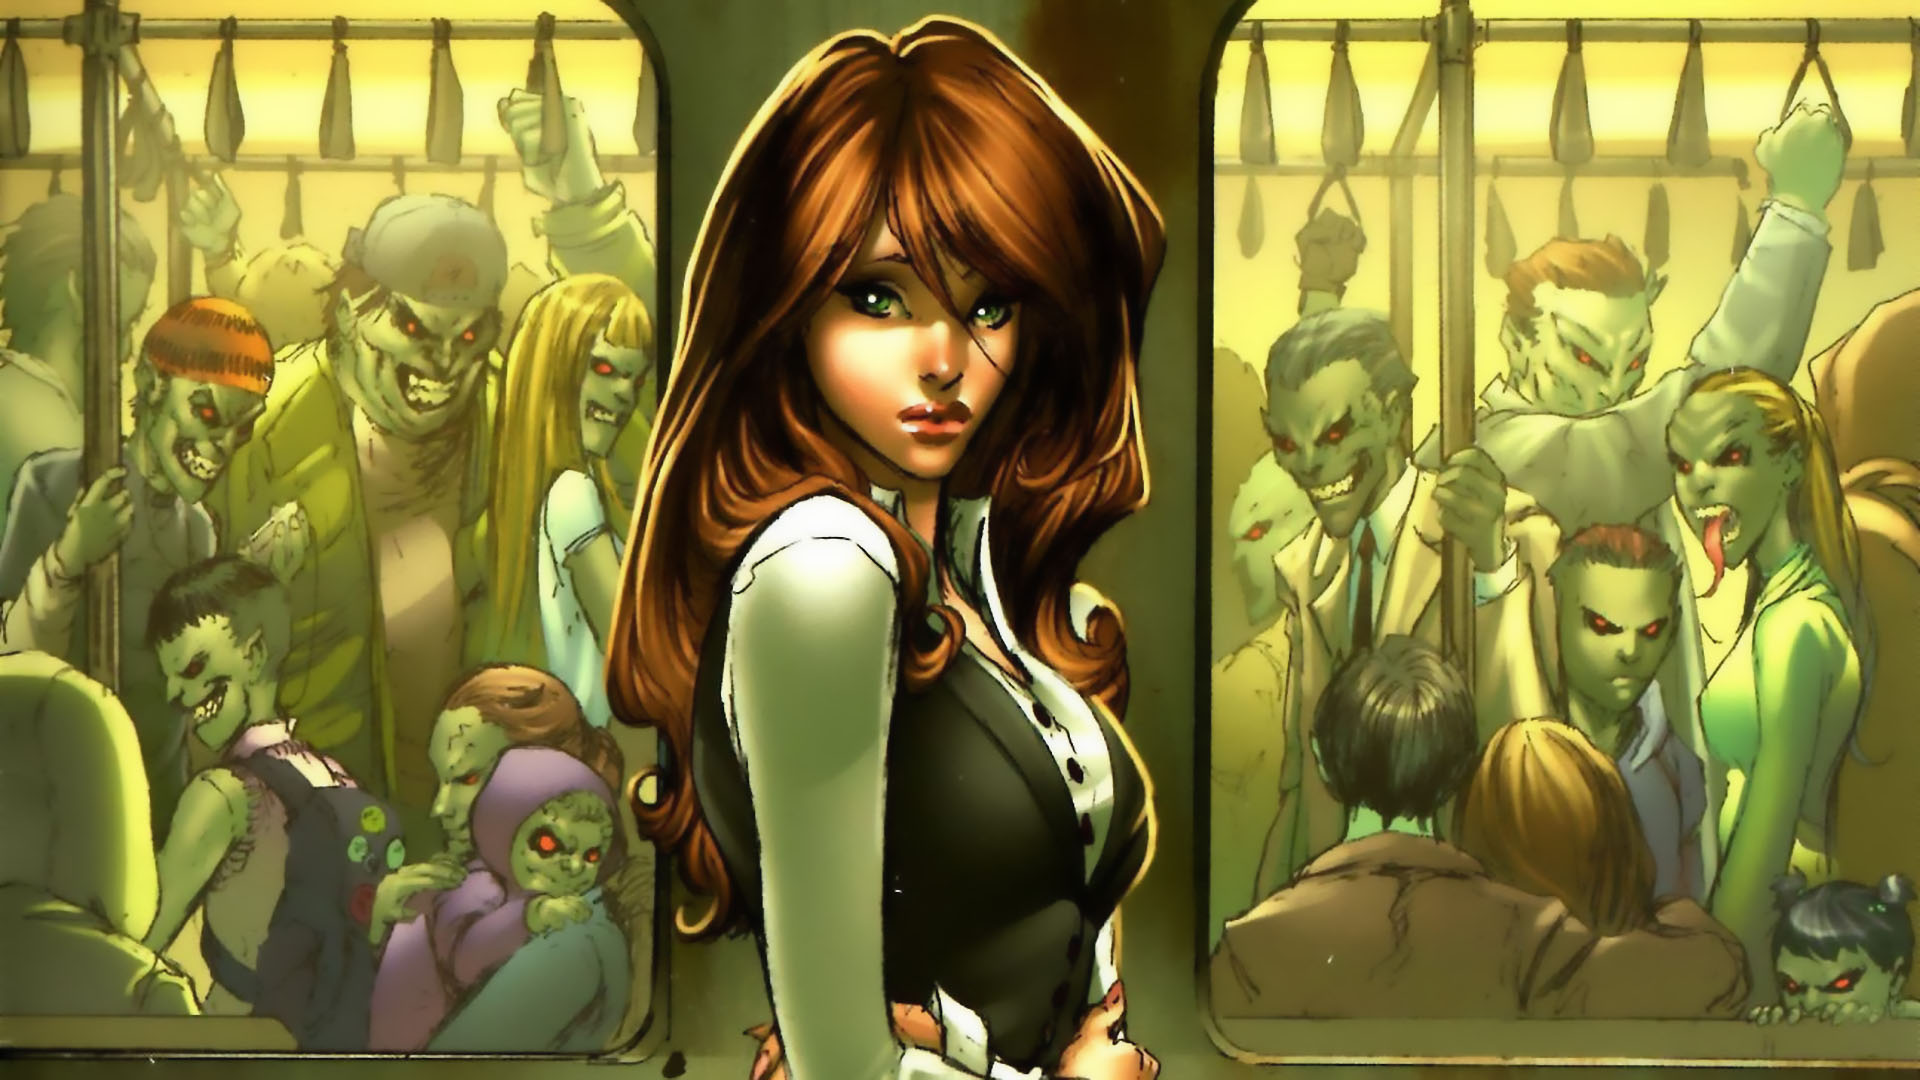 Amazing Grimm Fairy Tales: Inferno Pictures & Backgrounds